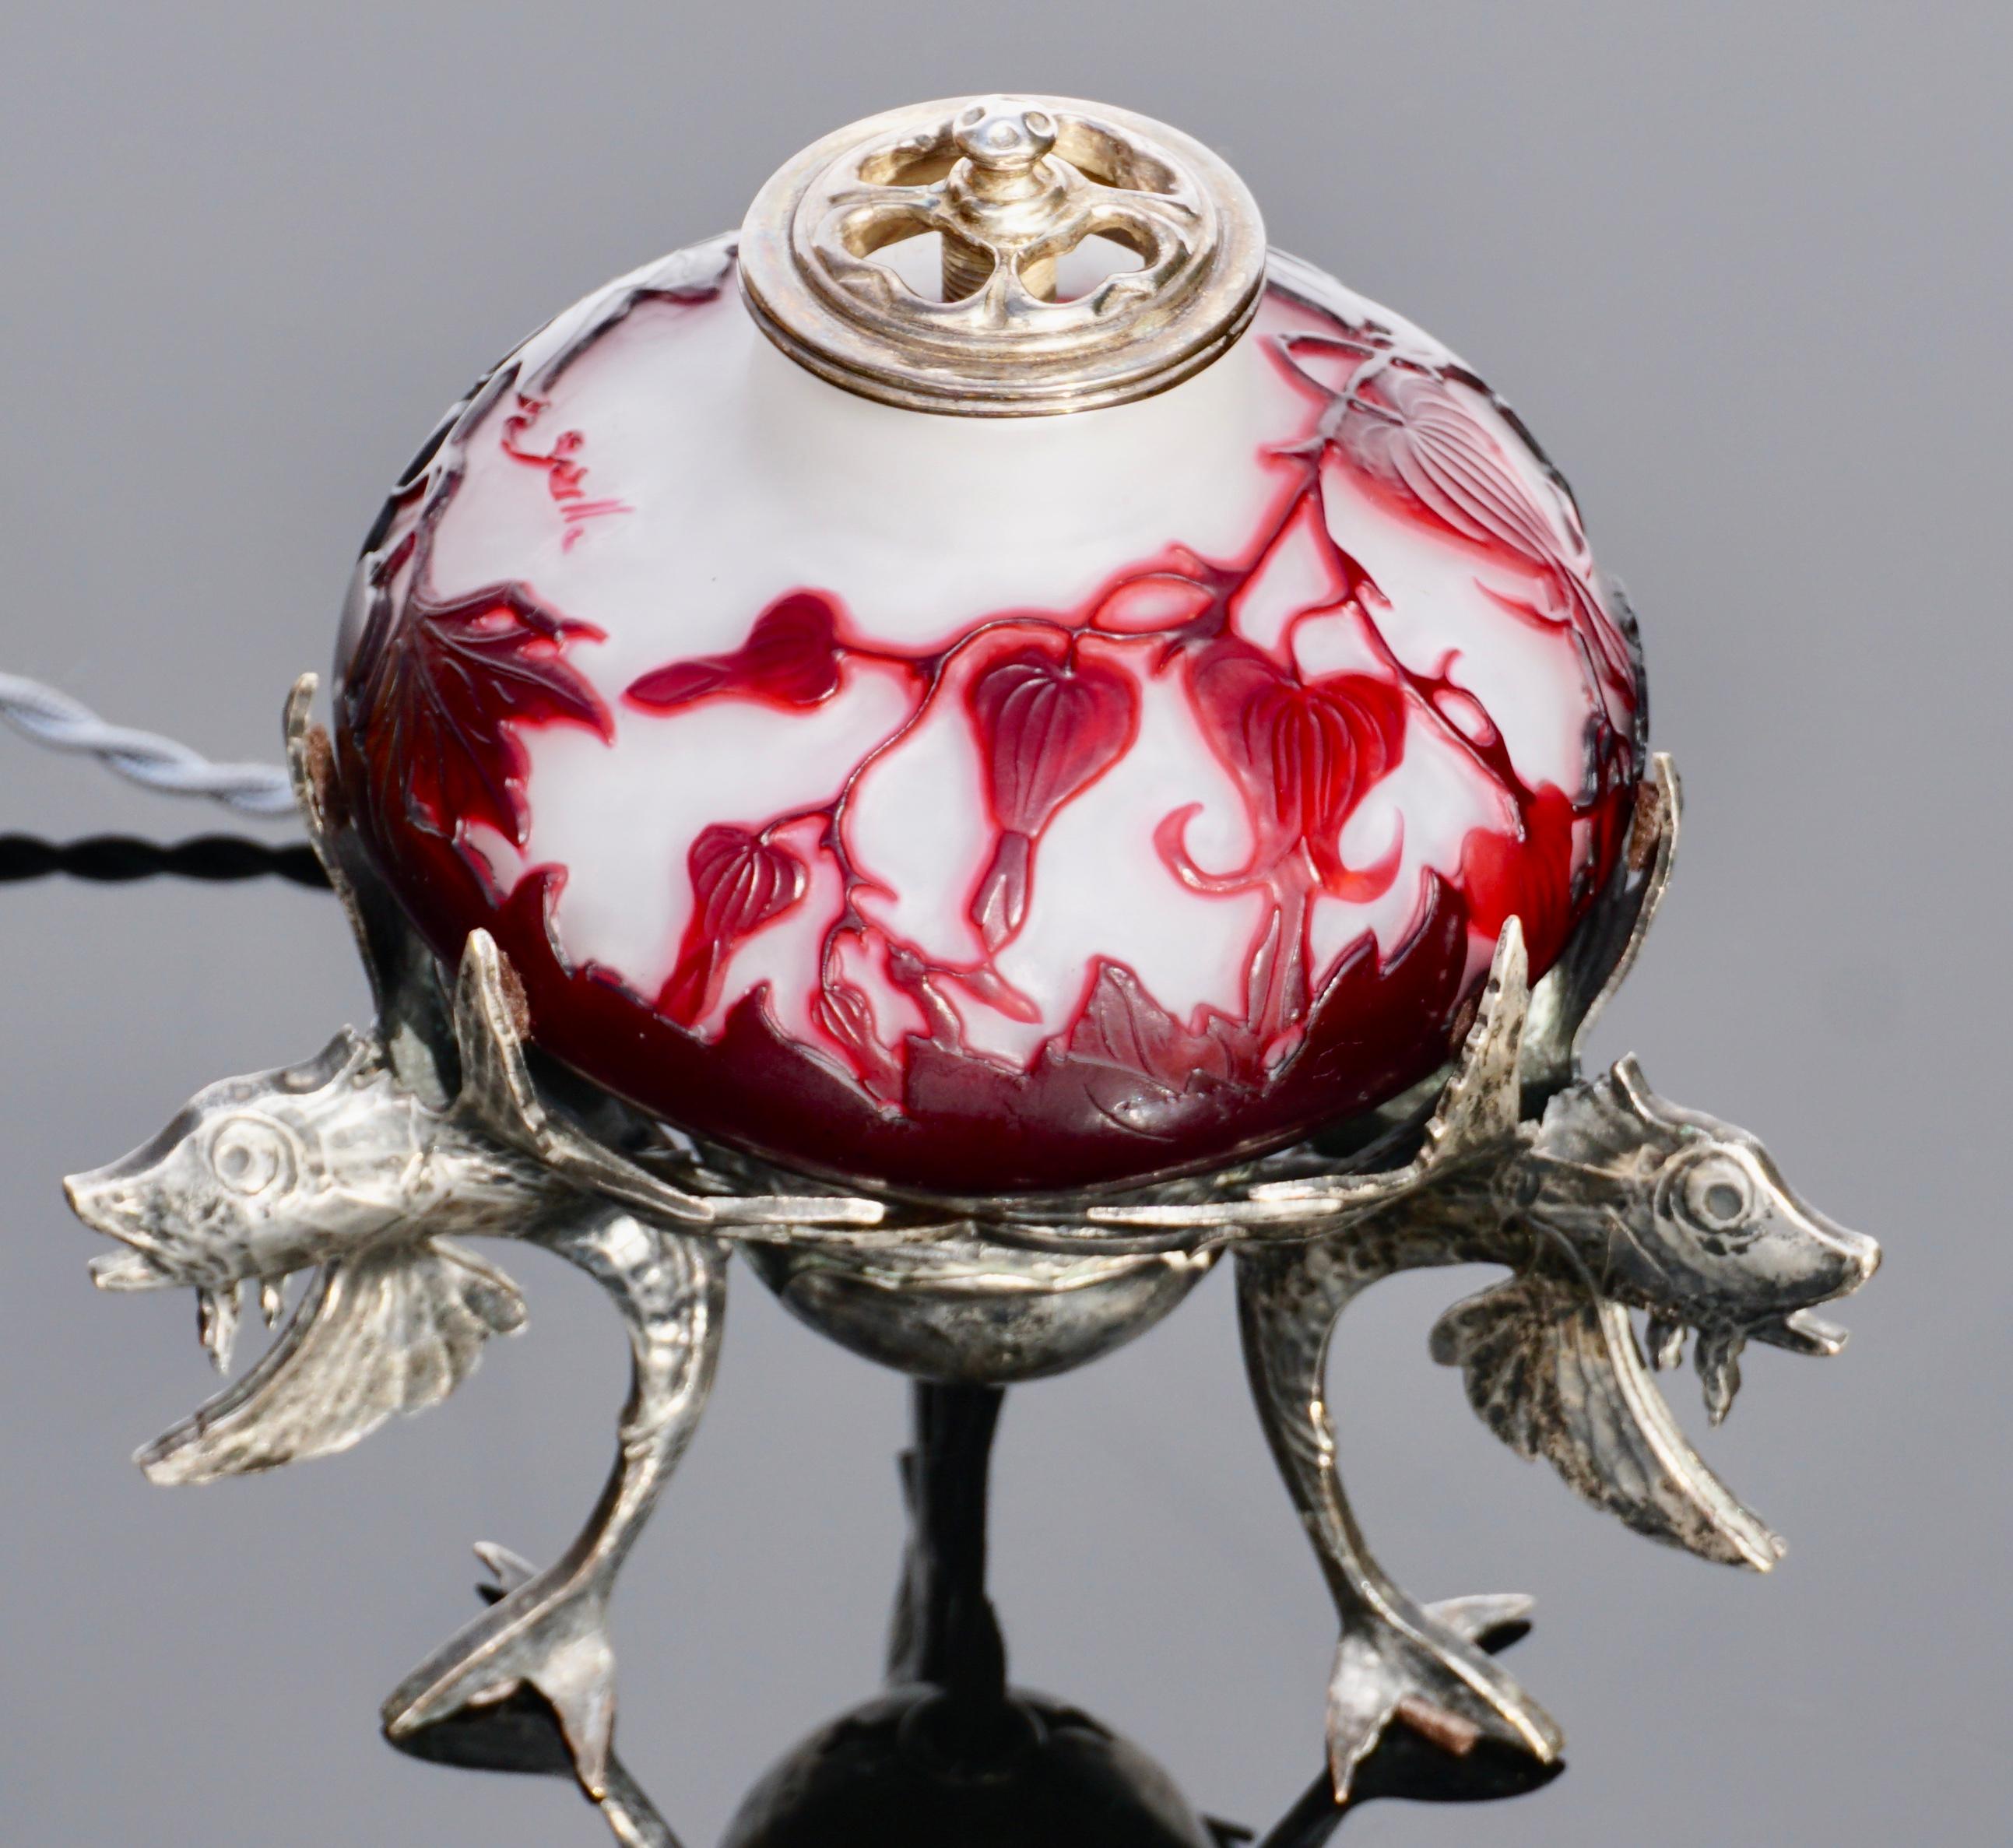 Emile Galle French Art Nouveau nightlight has glass body with red cameo leaf and flower decoration against a creamy white background. The glass body is housed within a silver plated frame with flying fish feet with wings supporting the glass body. A